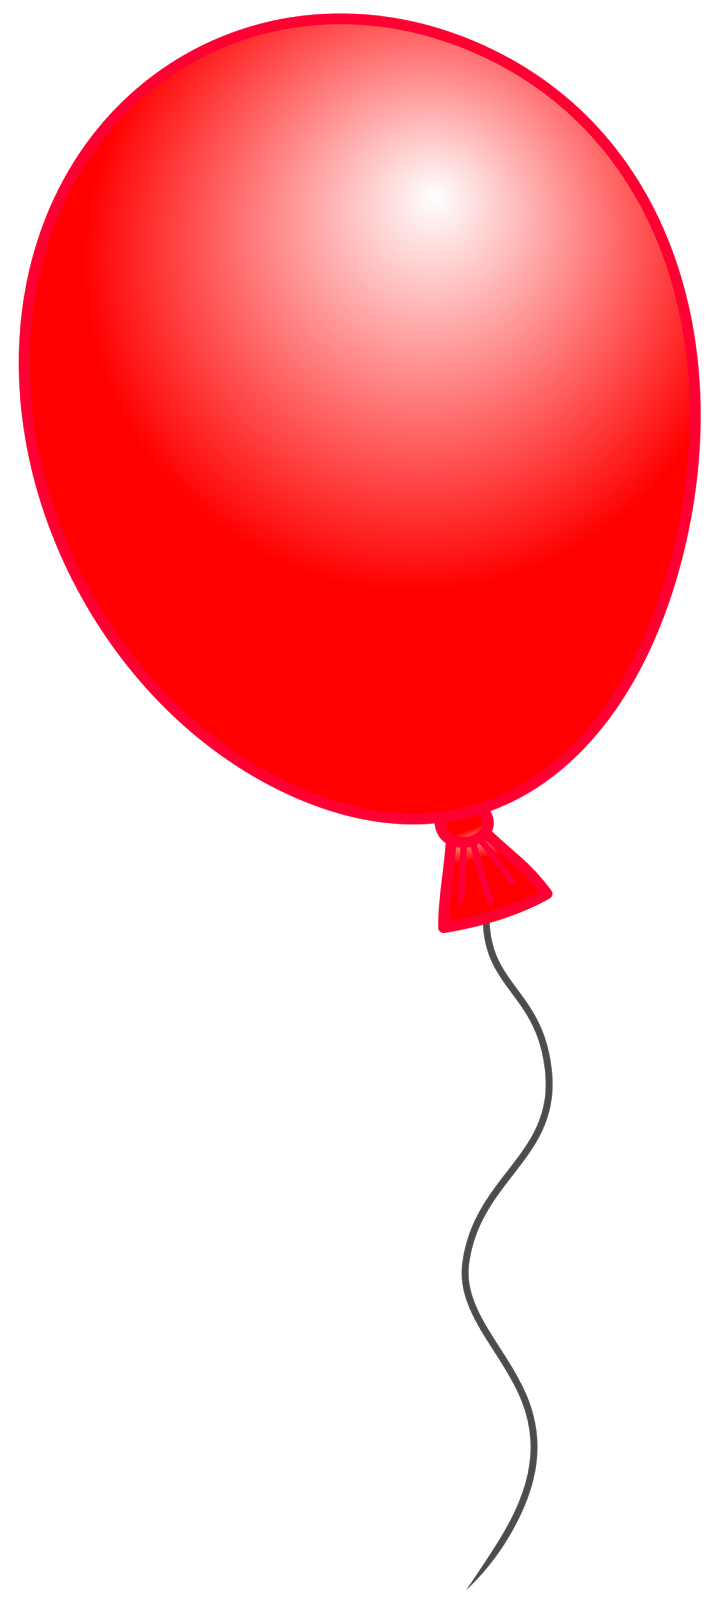 Balloon Clip art - balloons png download - 724*1600 - Free Transparent ...